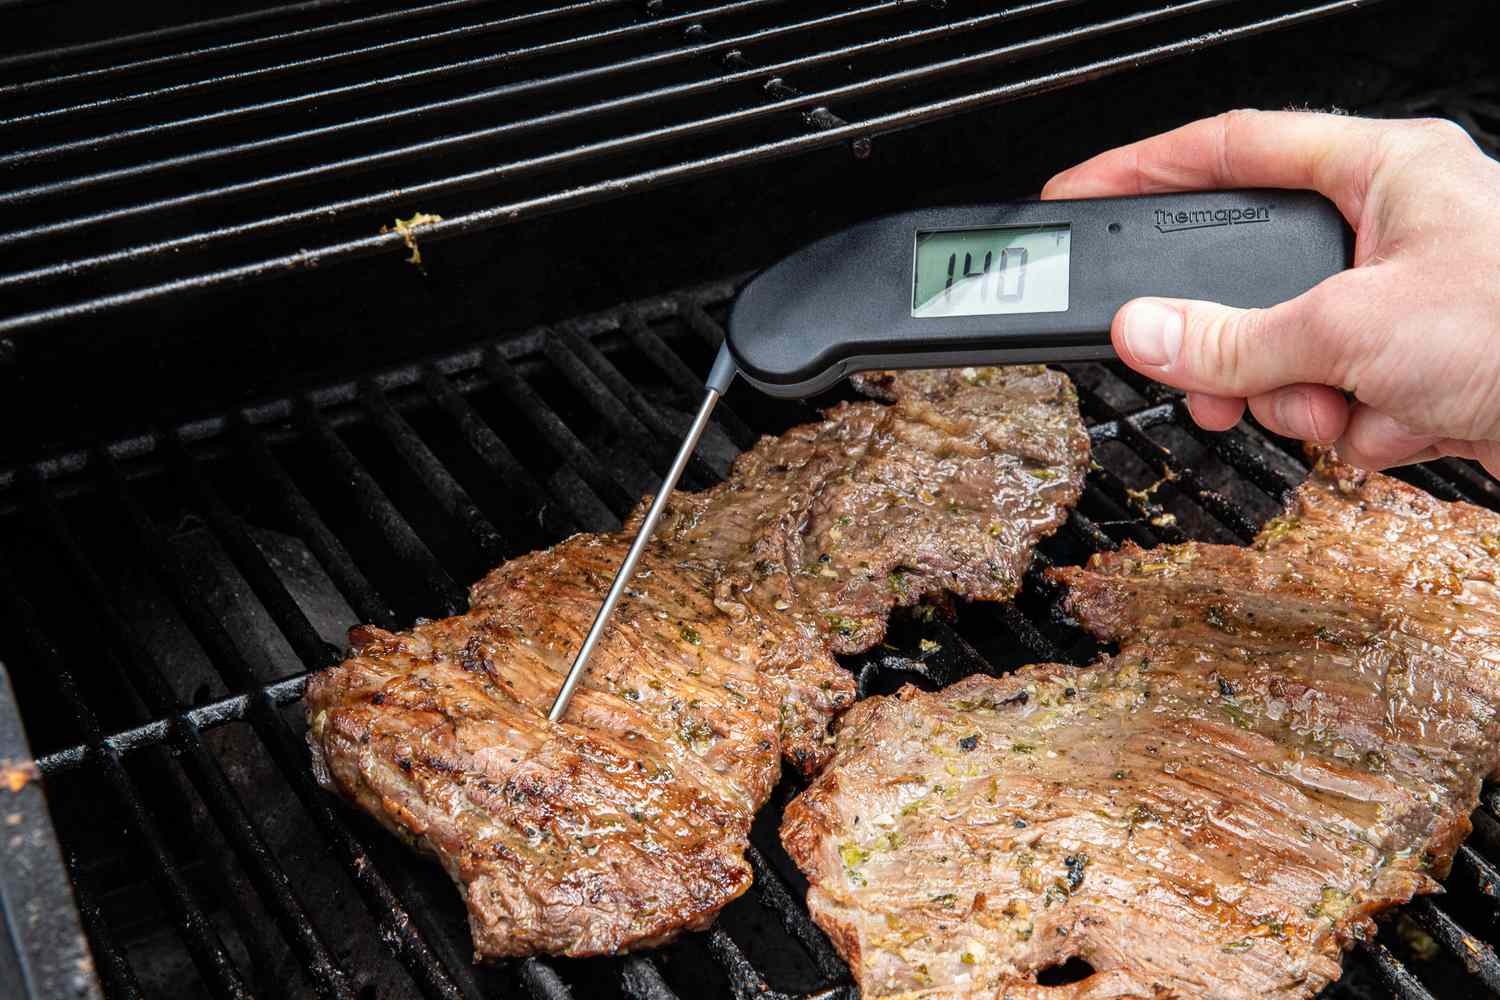 Cooking Thermometer Used to Check Internal Temperature of Arrachera on the Grill